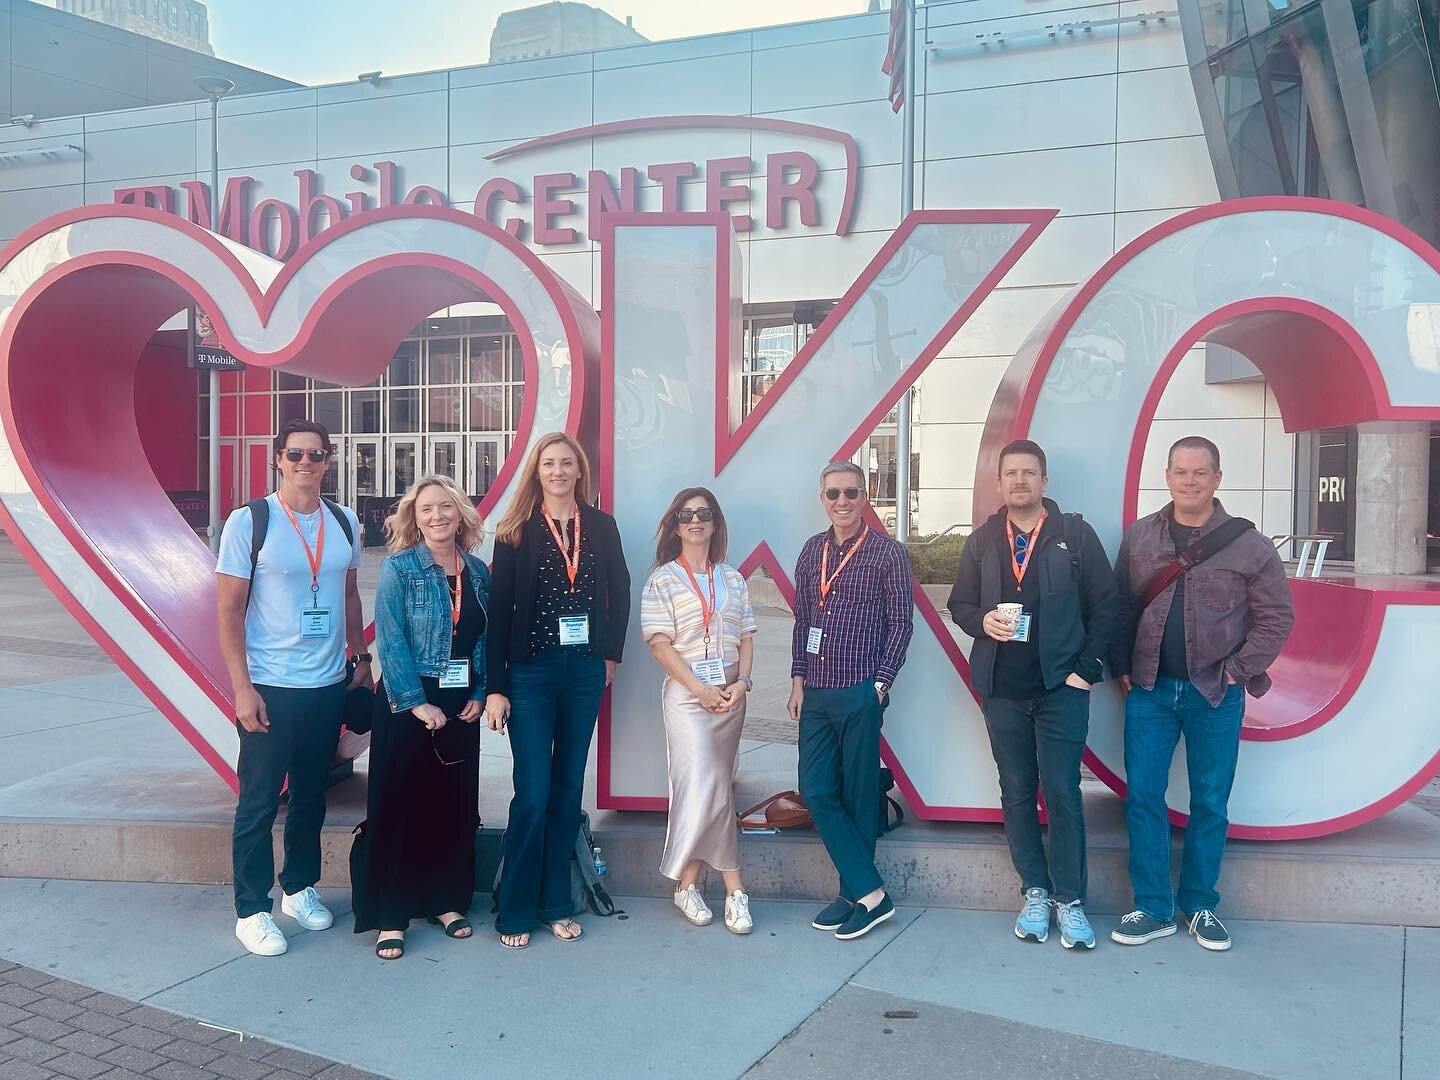 We are IRL and it feels good!  We are in Kansas City enjoying listening to great speakers at the Mirren Live Conference and, of course, inhaling delicious KC BBQ. 

Special thank you to Mirren and @barkleyus for hosting us.  And a heartfelt thank you